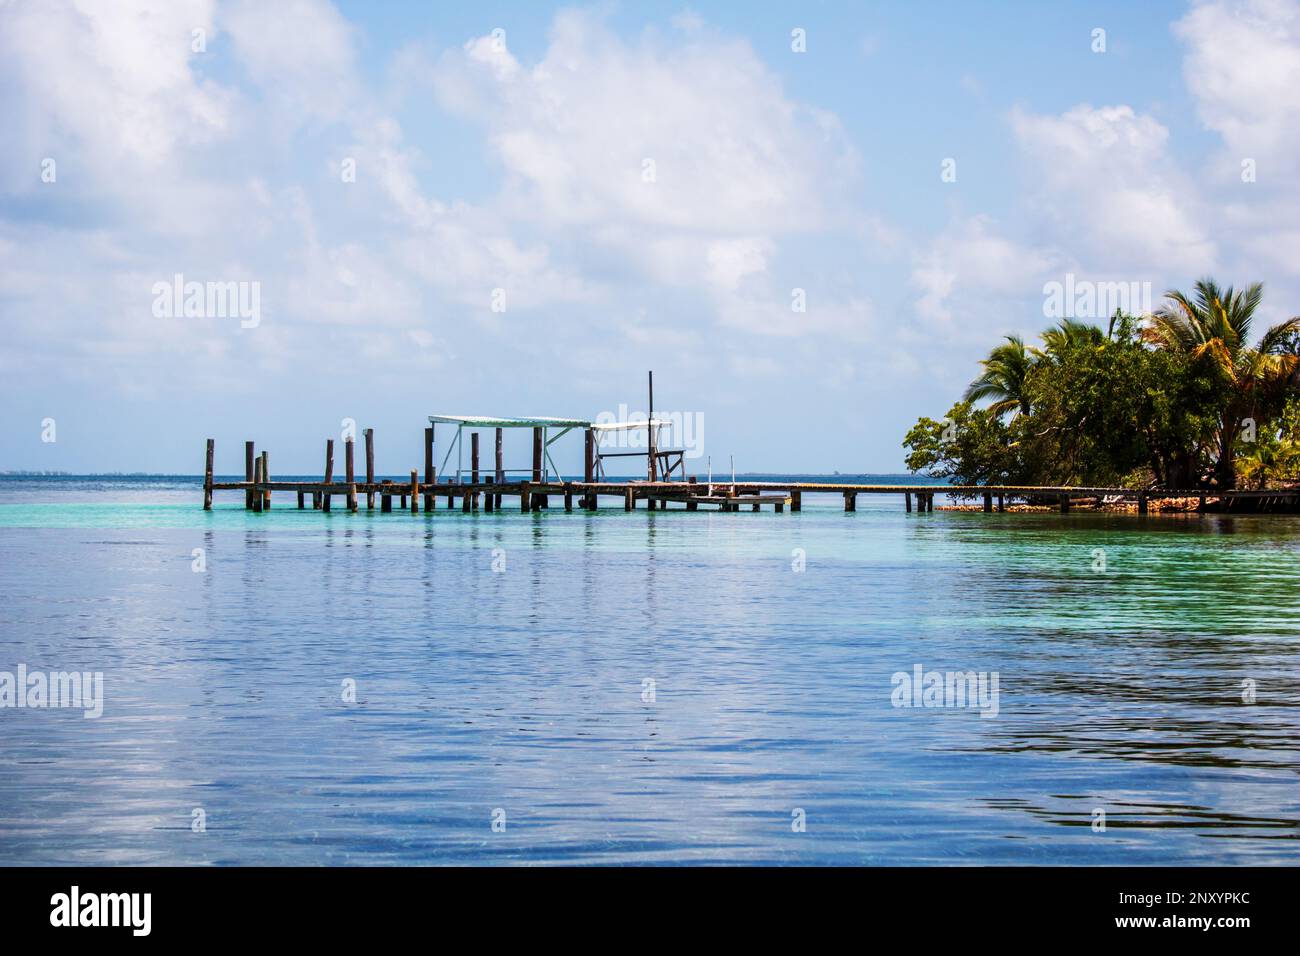 Dock on island of South Water Caye Marine Reserve in Belize Barrier Reef Stock Photo